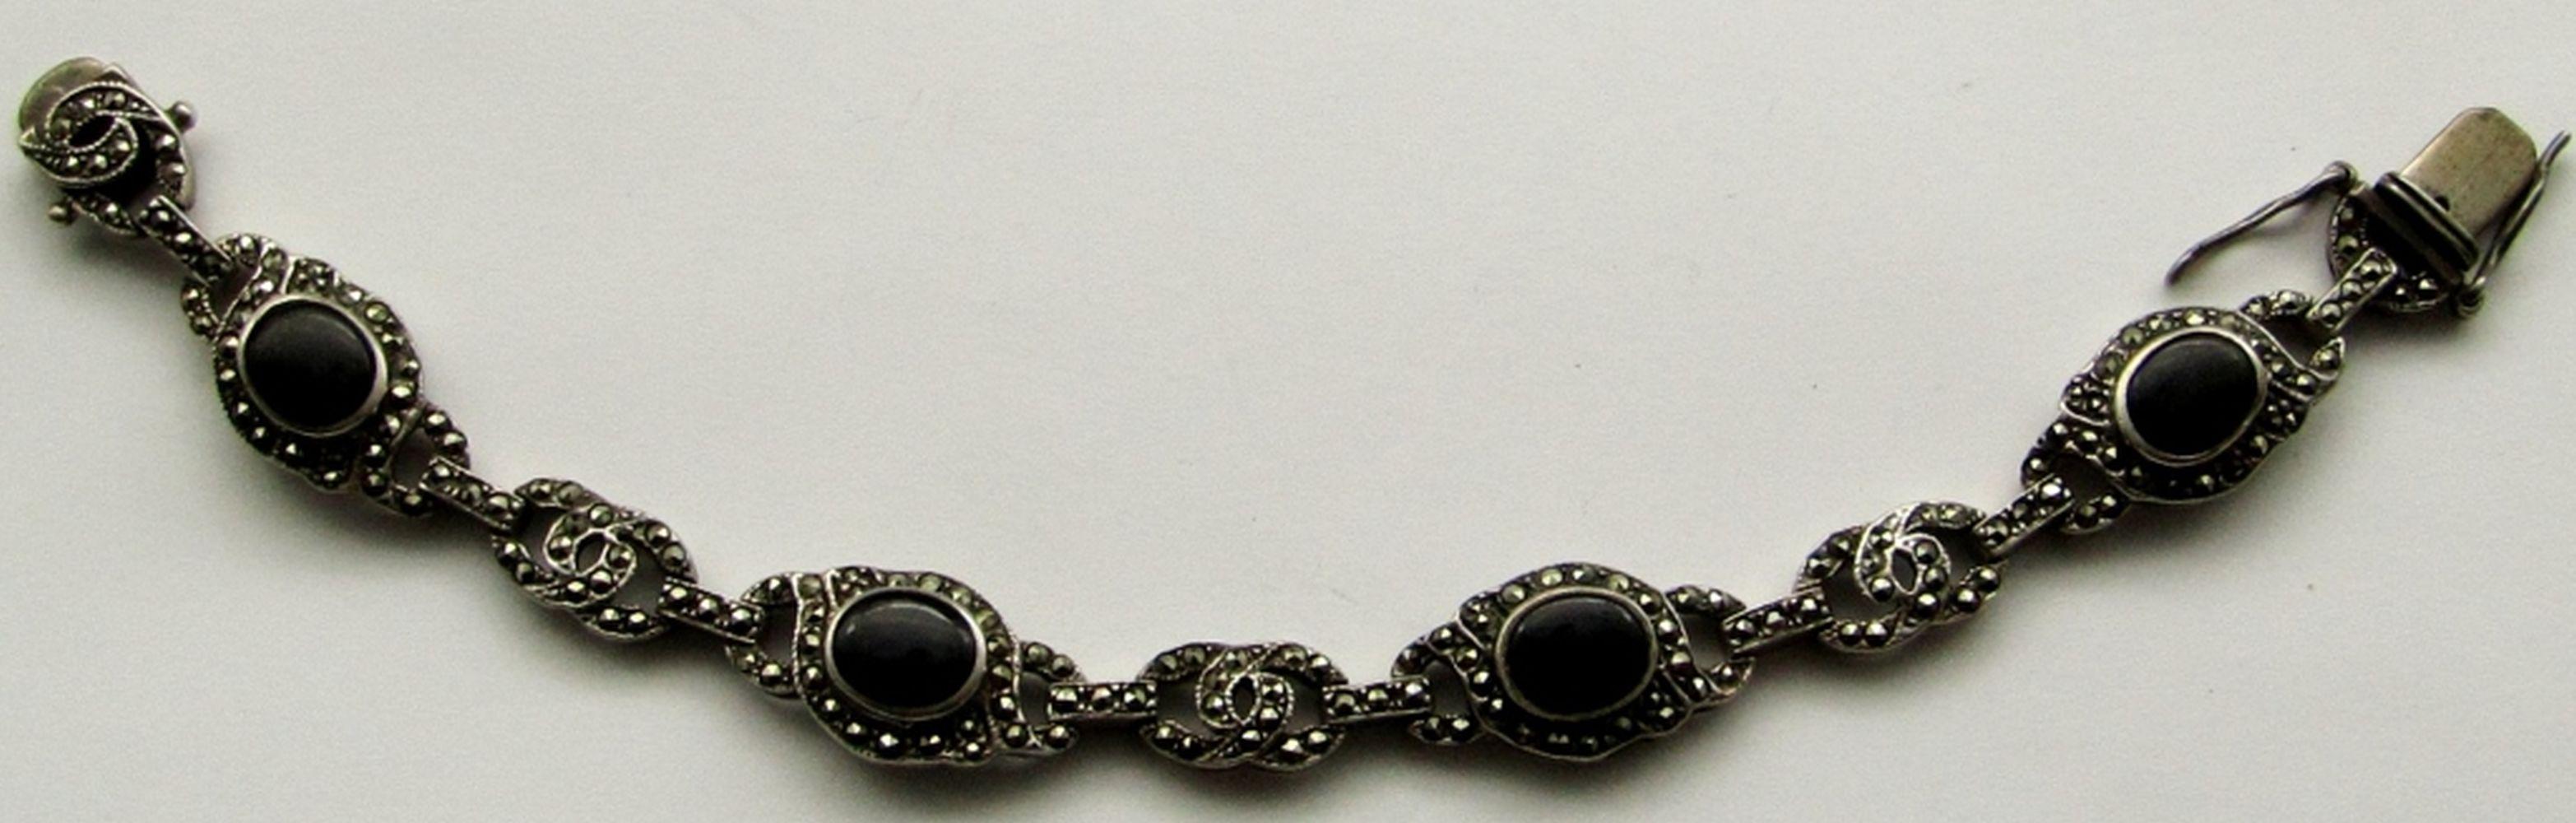 ANTIQUE STERLING 7" BRACELET WITH ONYX STONES